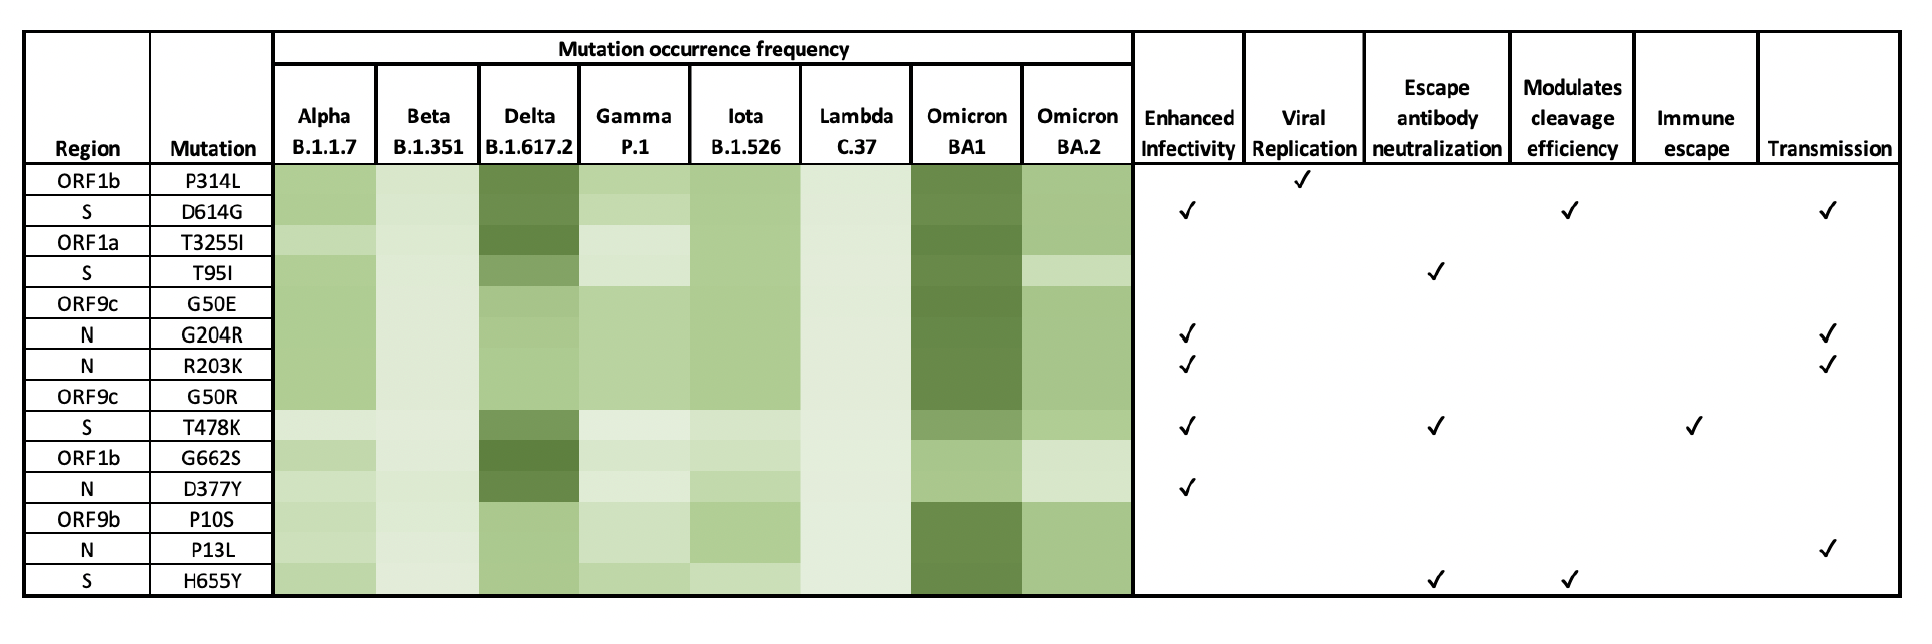 Table showing a heatmap of the function and incidence intensity of the most frequently occurring COVID-19 amino acid mutations in order of decreasing incidence from top to bottom. A darker color indicates a higher frequency of occurrence of the mutation.